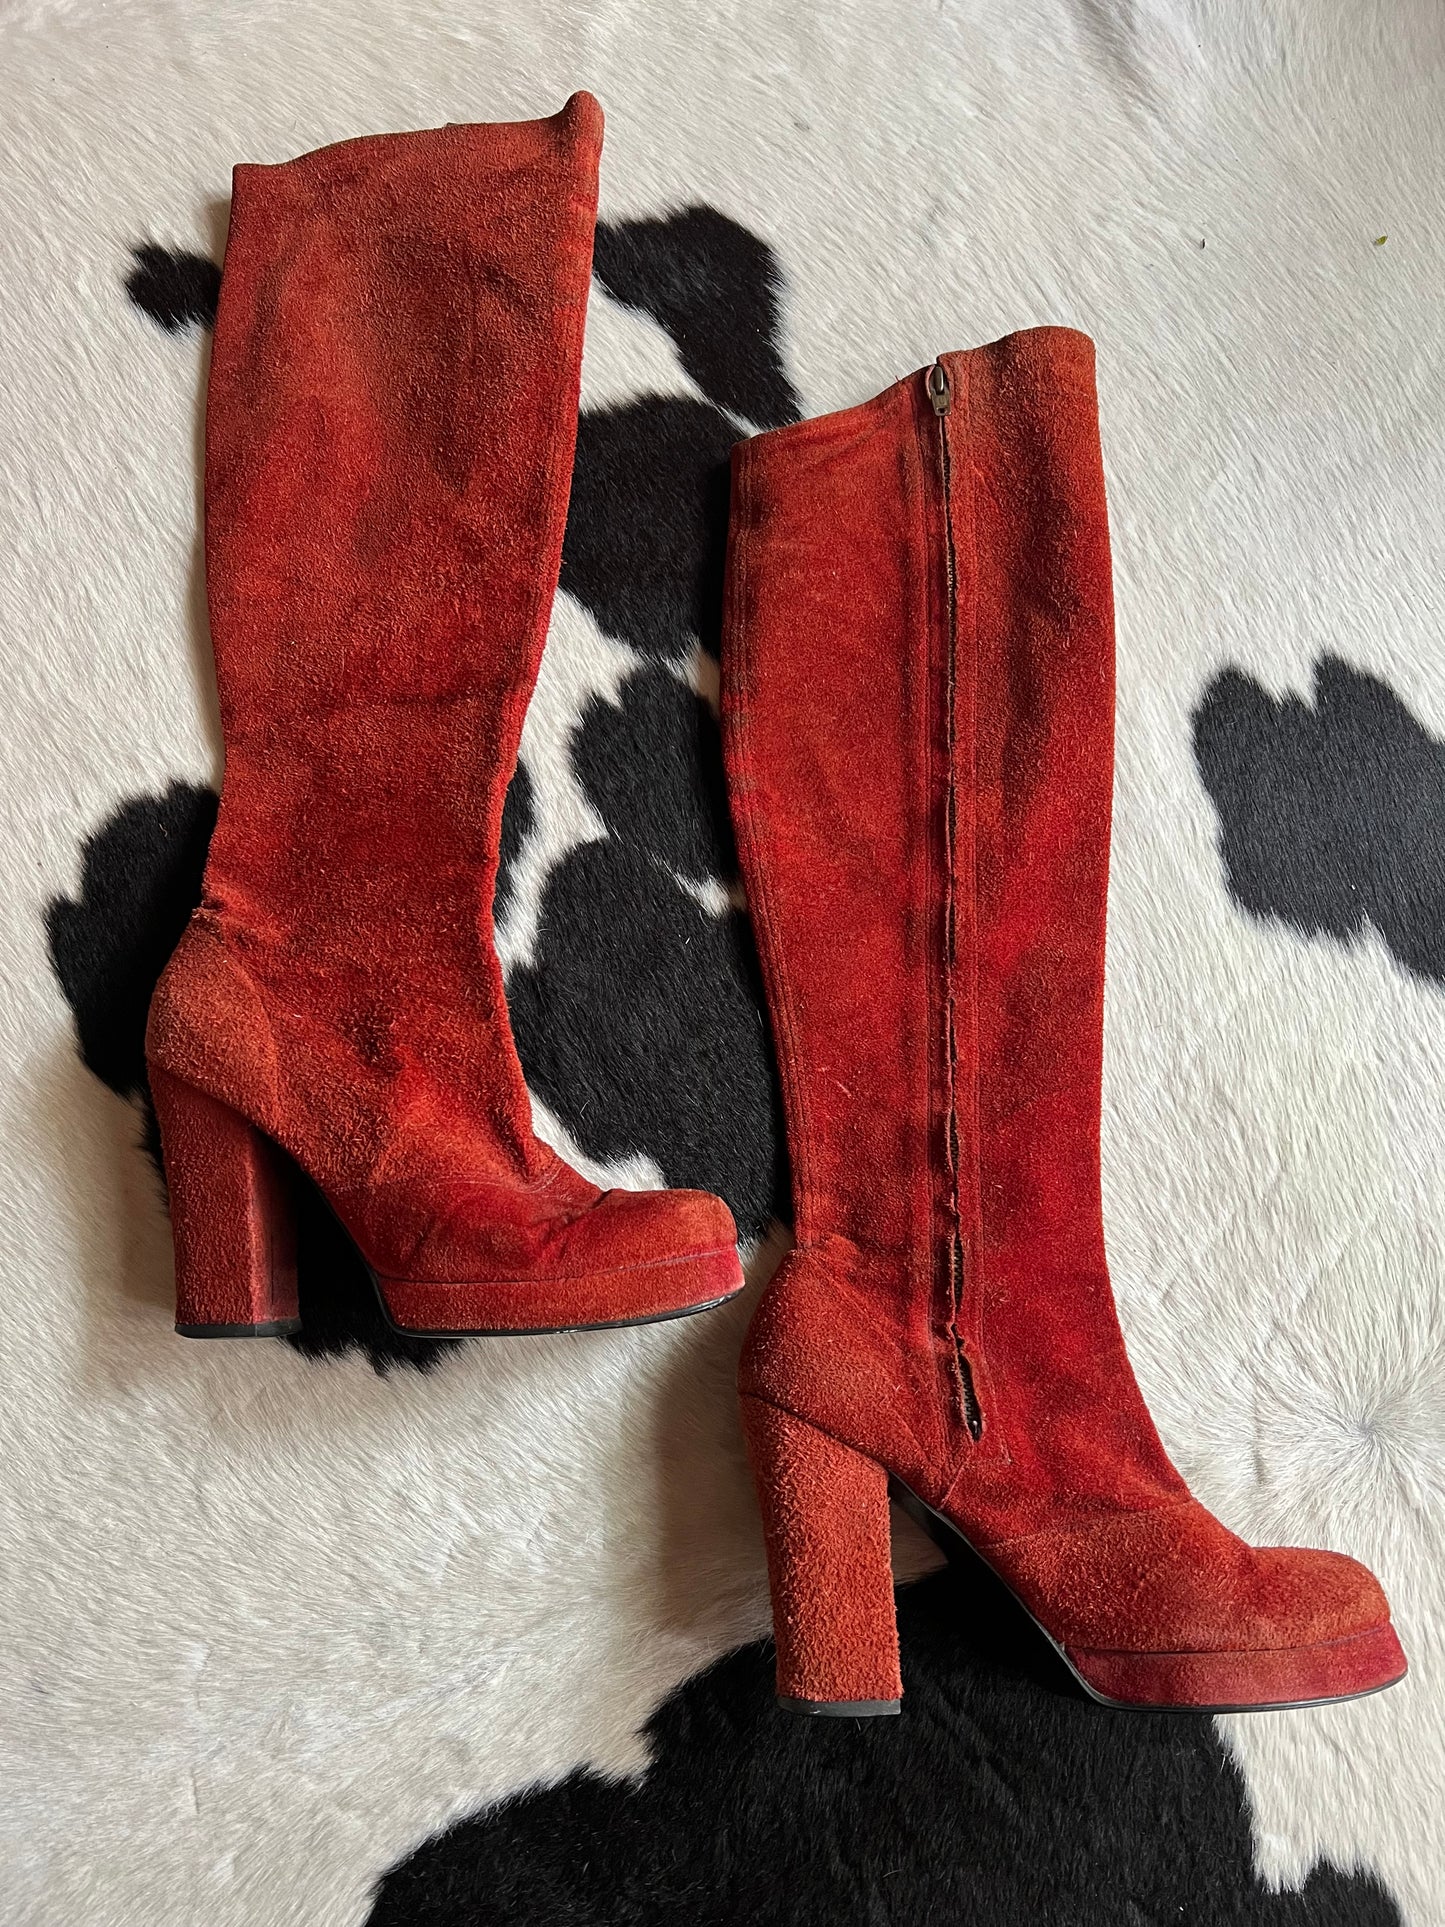 1970s suede knee high boots